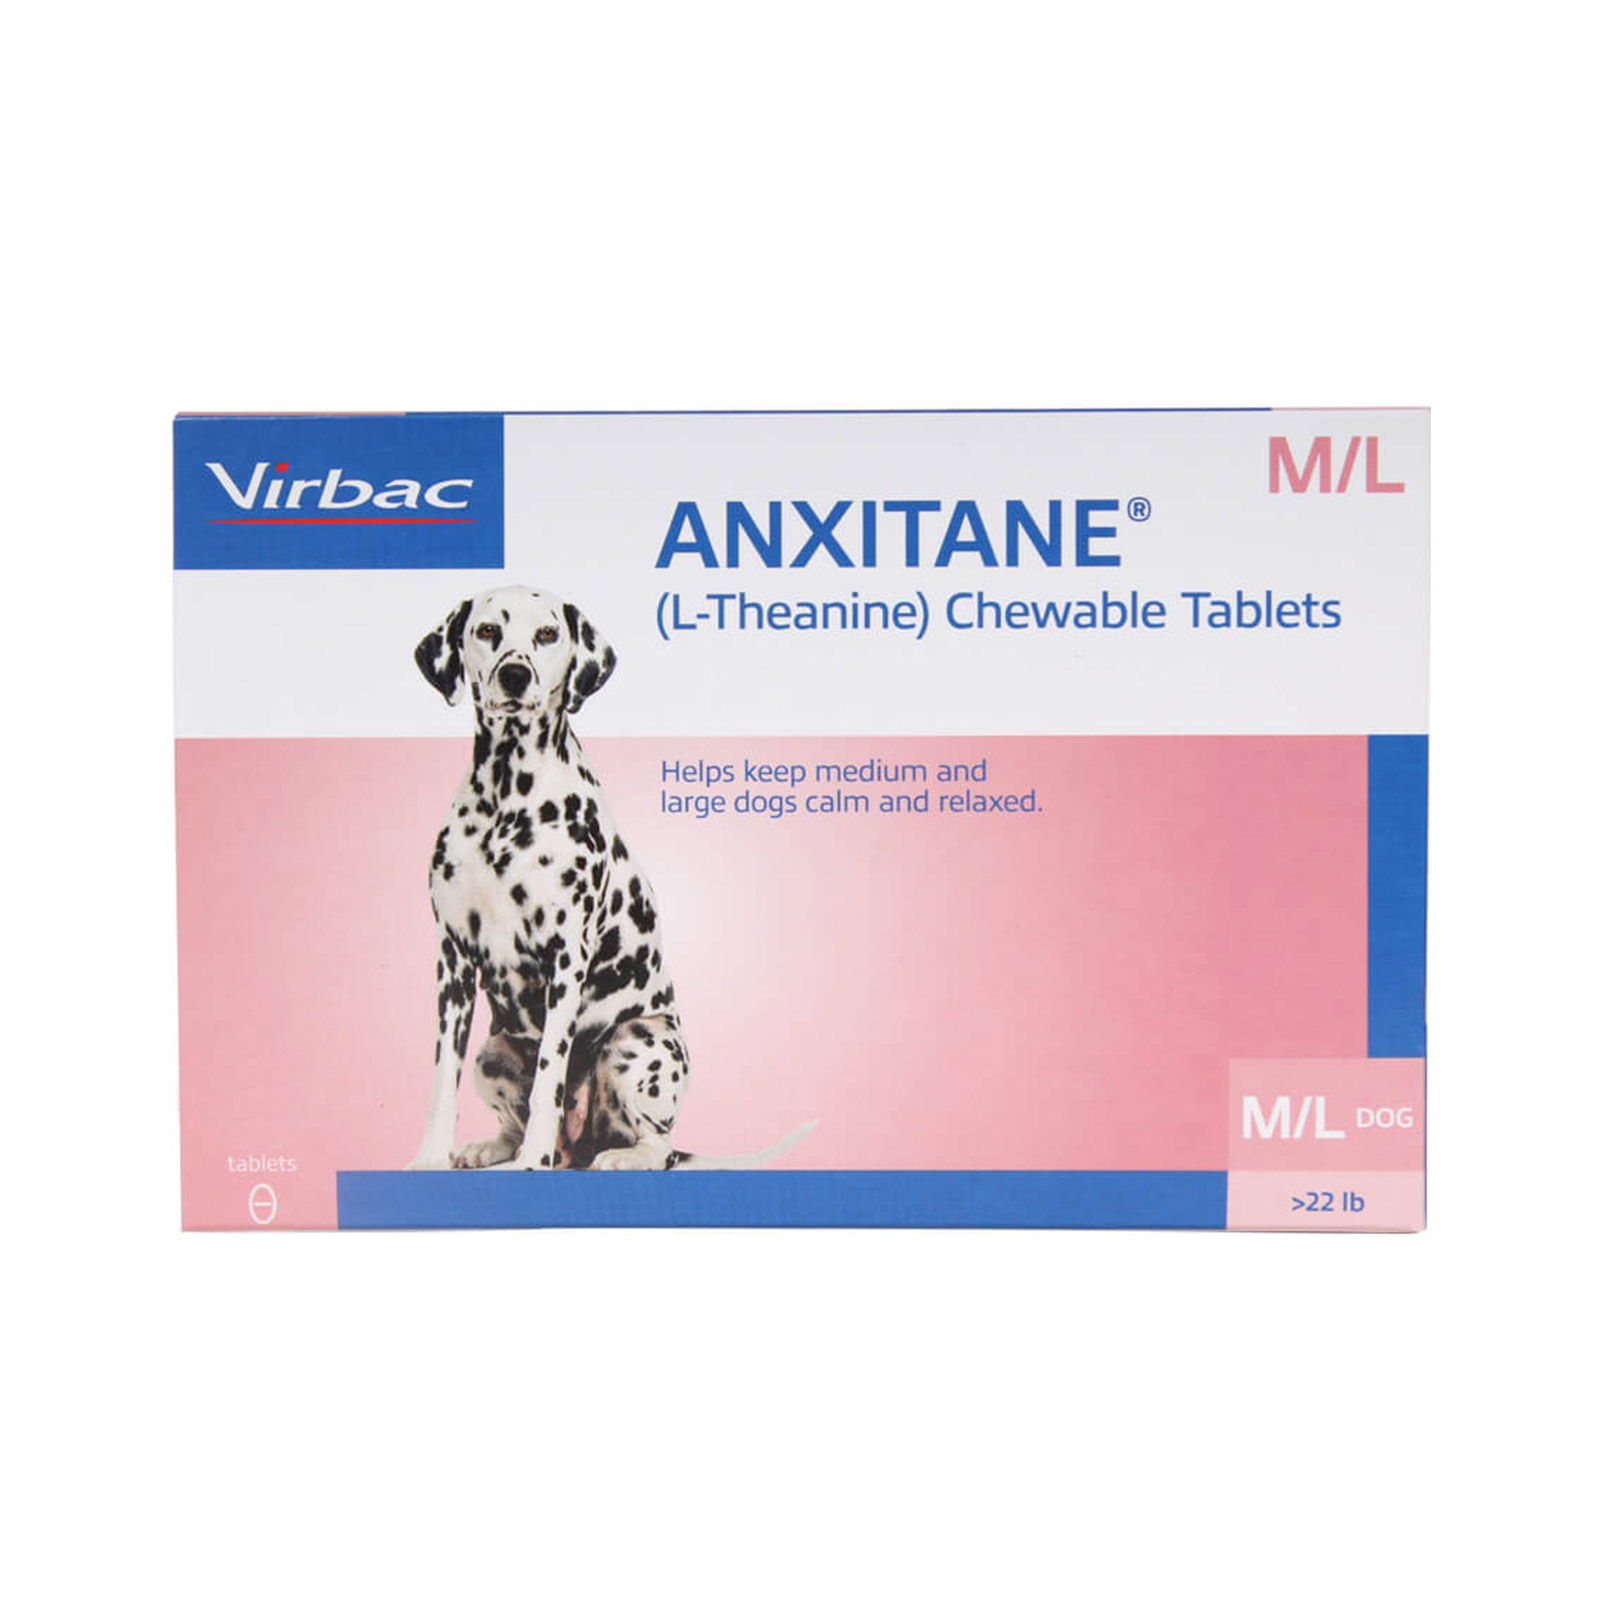 "Anxitane Chewable Tablets For Medium/Large Dogs 30 Tablets"